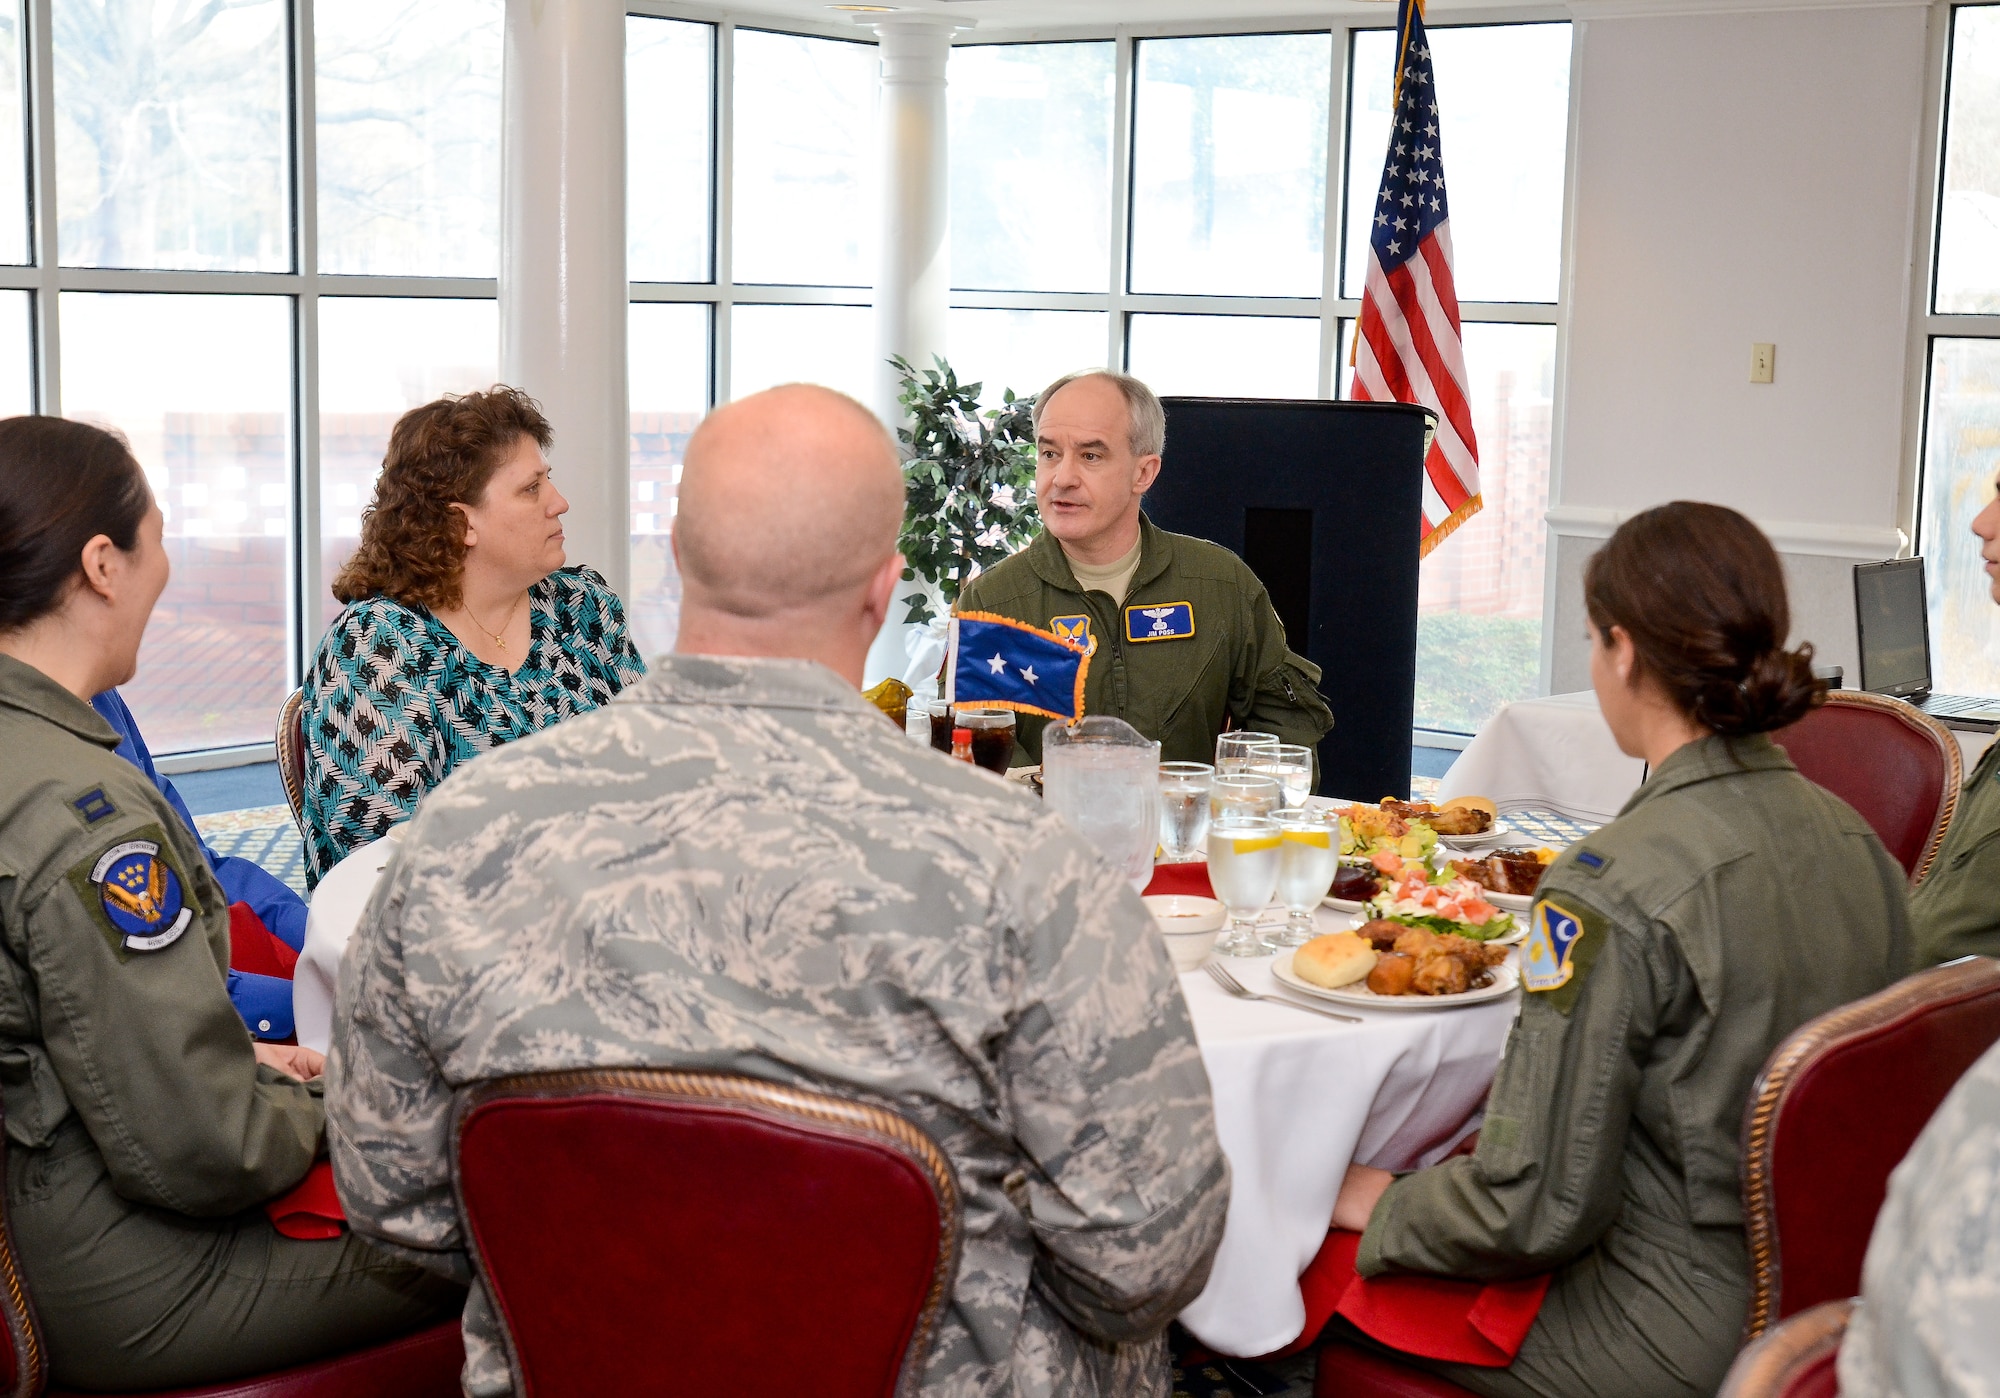 Maj. Gen. James Poss, center, assistant deputy chief of staff for intelligence, surveillance and reconnaissance, Headquarters U.S. Air Force, speaks to intelligence officers and civilians during a lunch at the Horizon's Club, Robins Air Force Base, Ga., Jan. 26, 2012.  Poss met with intelligence personnel at Robins during a two-day  intelligence organizations site visit.   (National Guard photo by Master Sgt. Roger Parsons/Released)